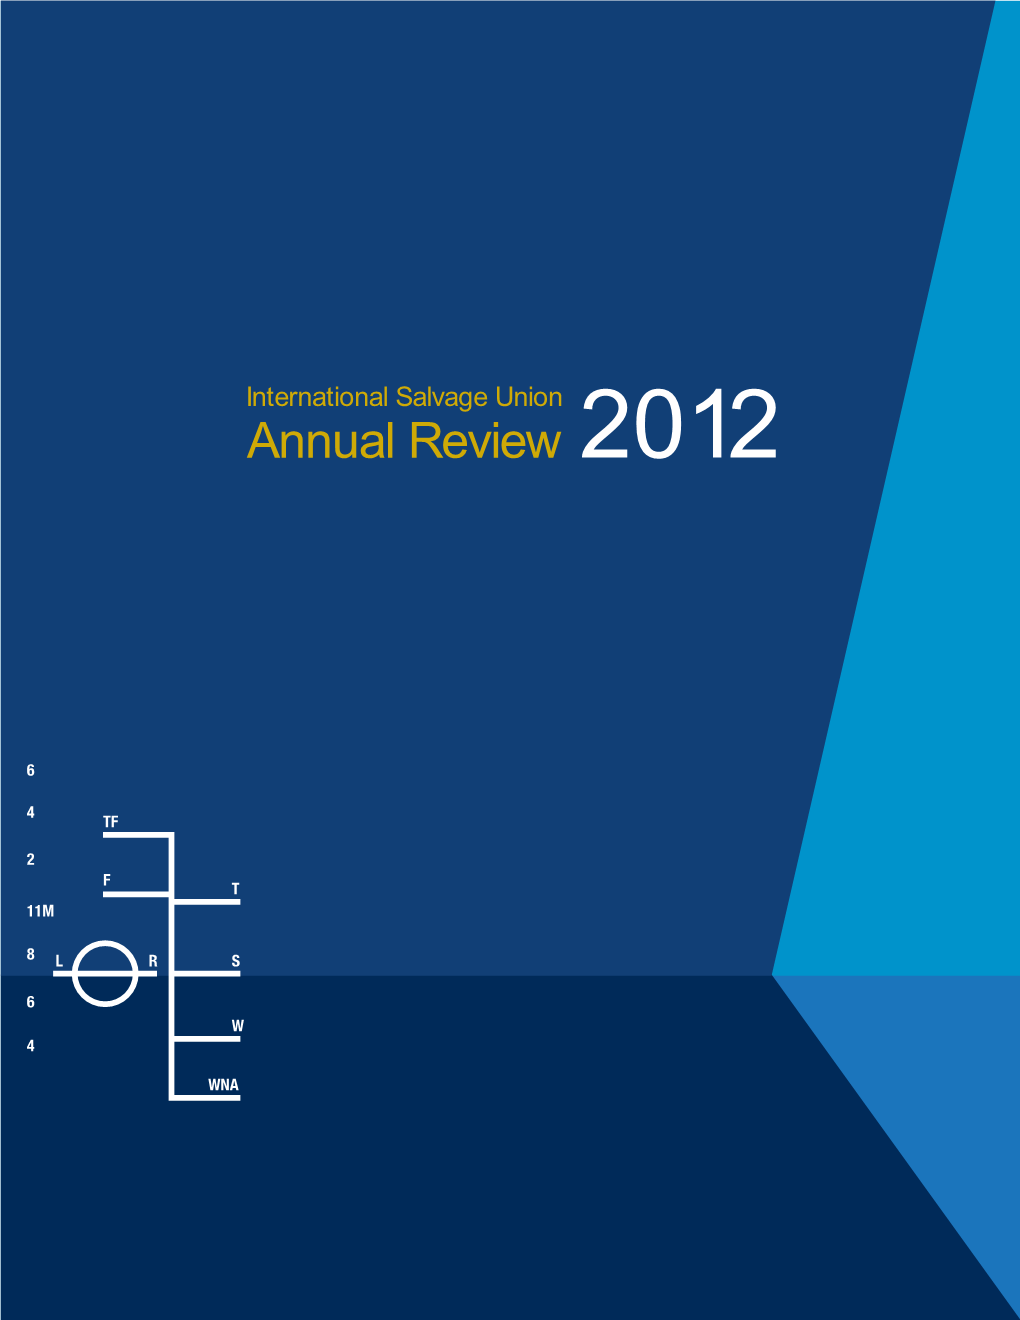 Annual Review 2012